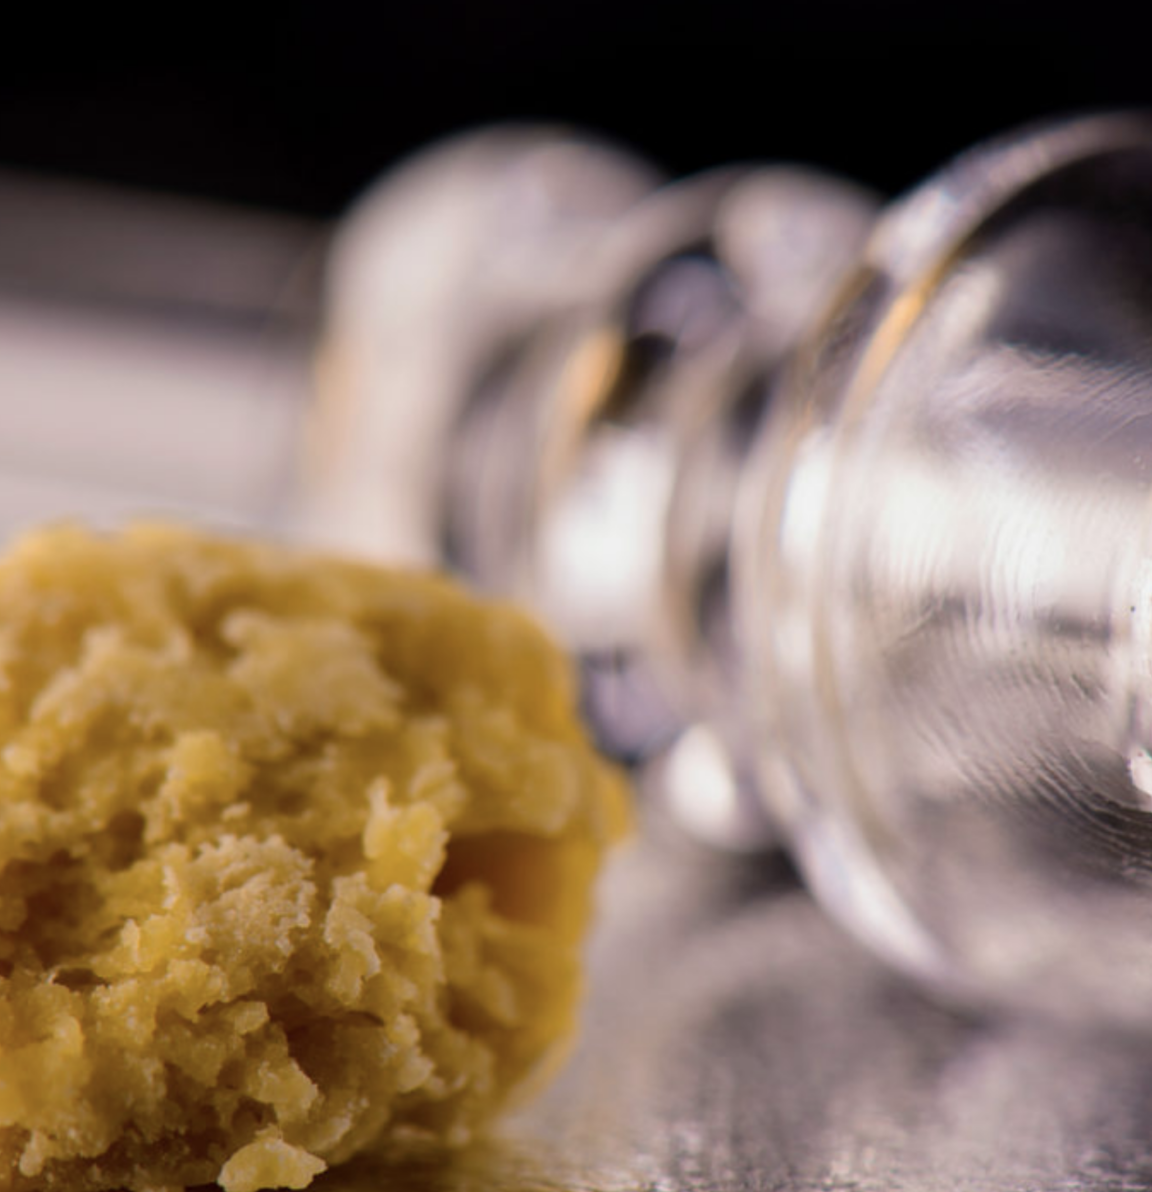 How To Clean a Glass Pipe Quickly (Plus Vaporizers, Dab Rigs, & Bubblers)